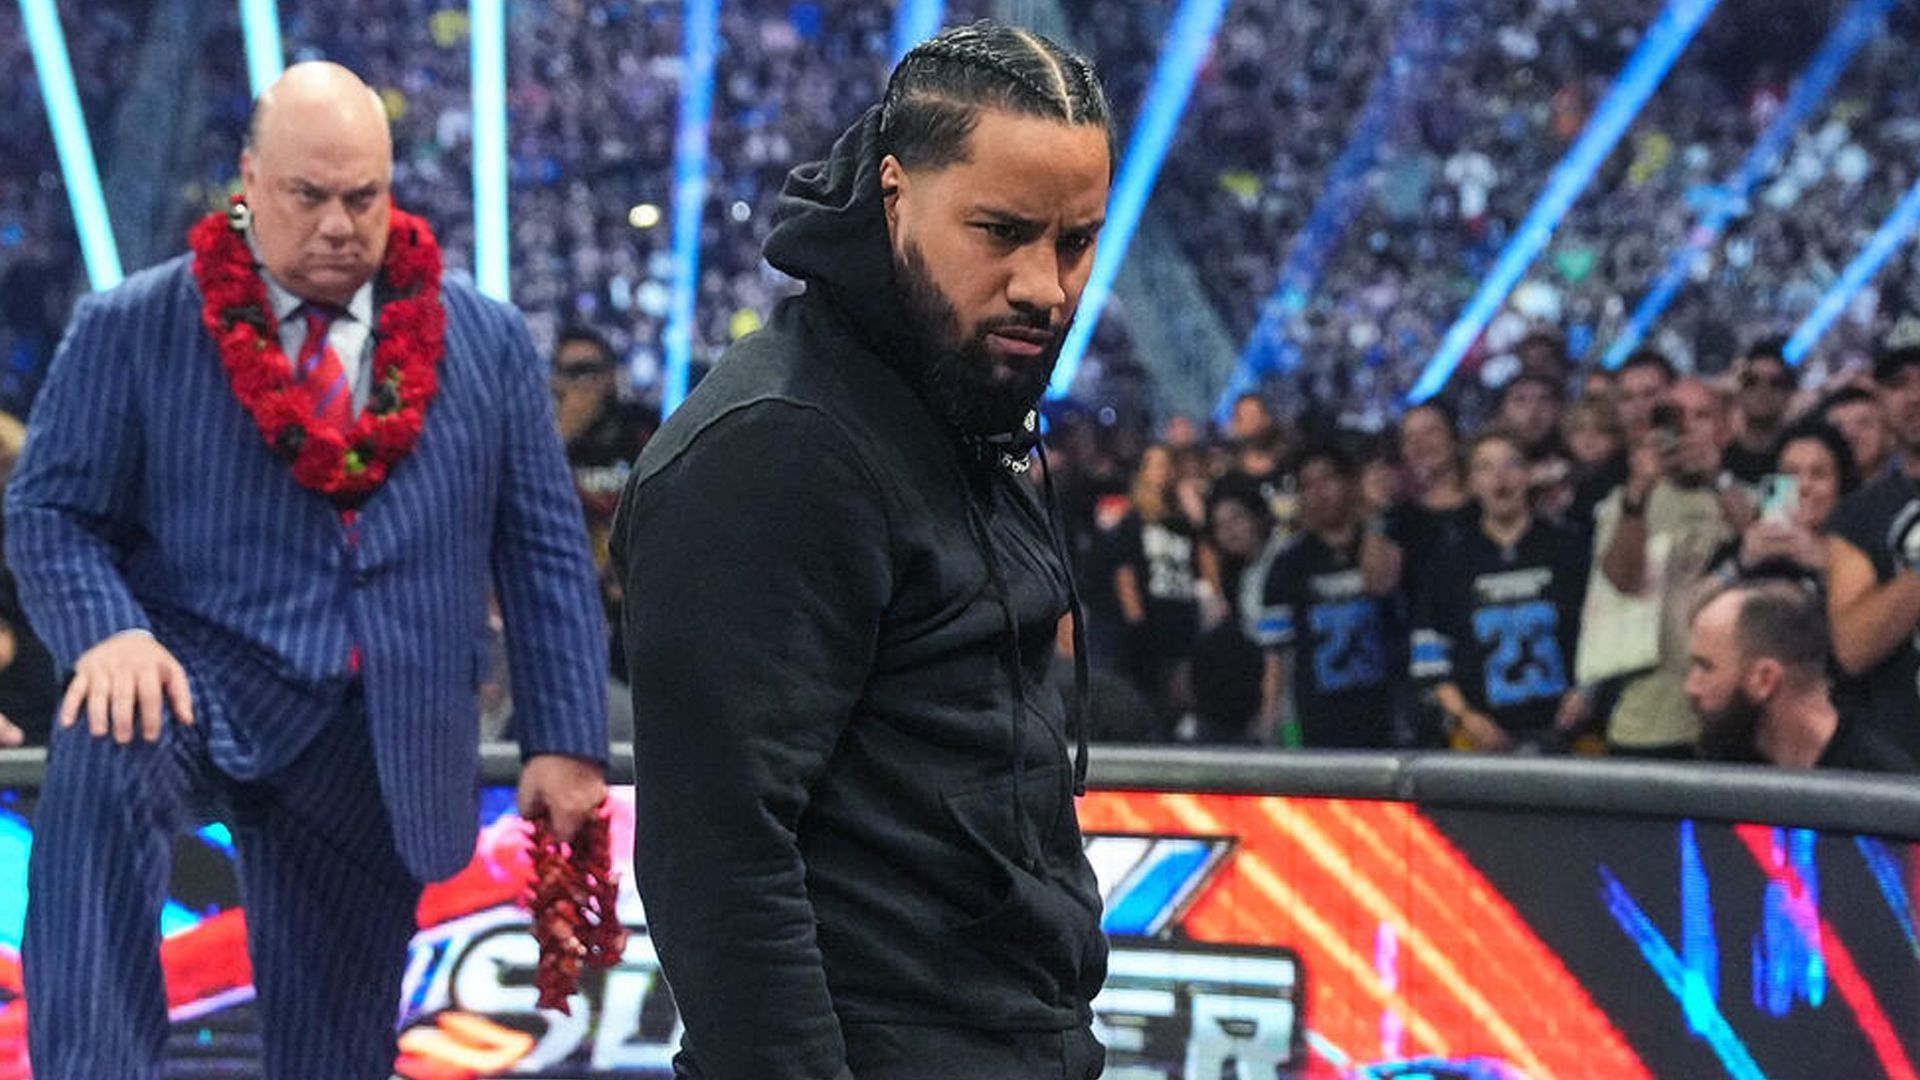 Jimmy Uso could return to WWE SmackDown tonight